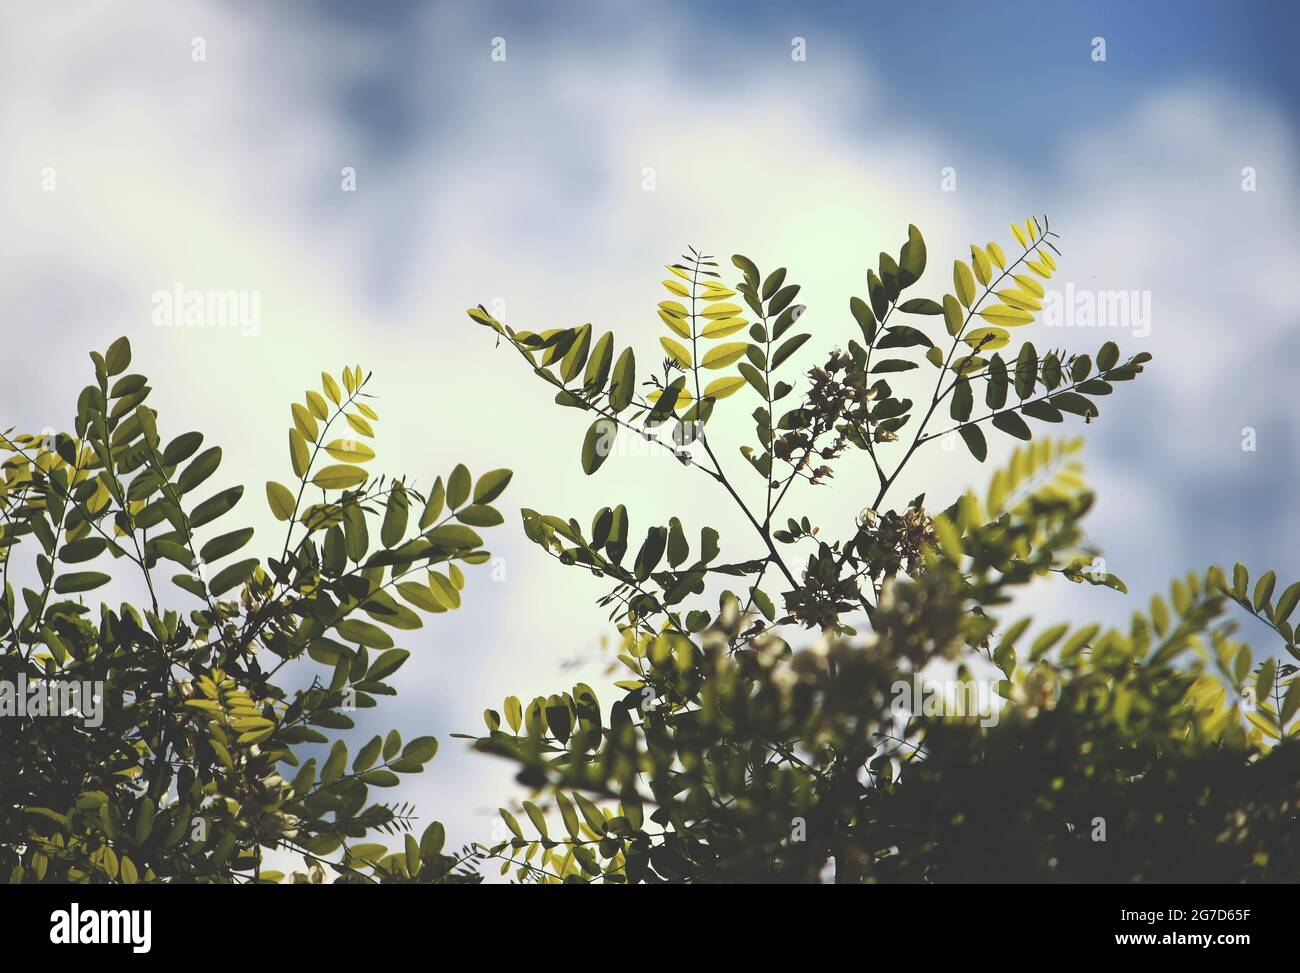 Blooming acacia tree at summer outdoors. White flowers. Stock Photo